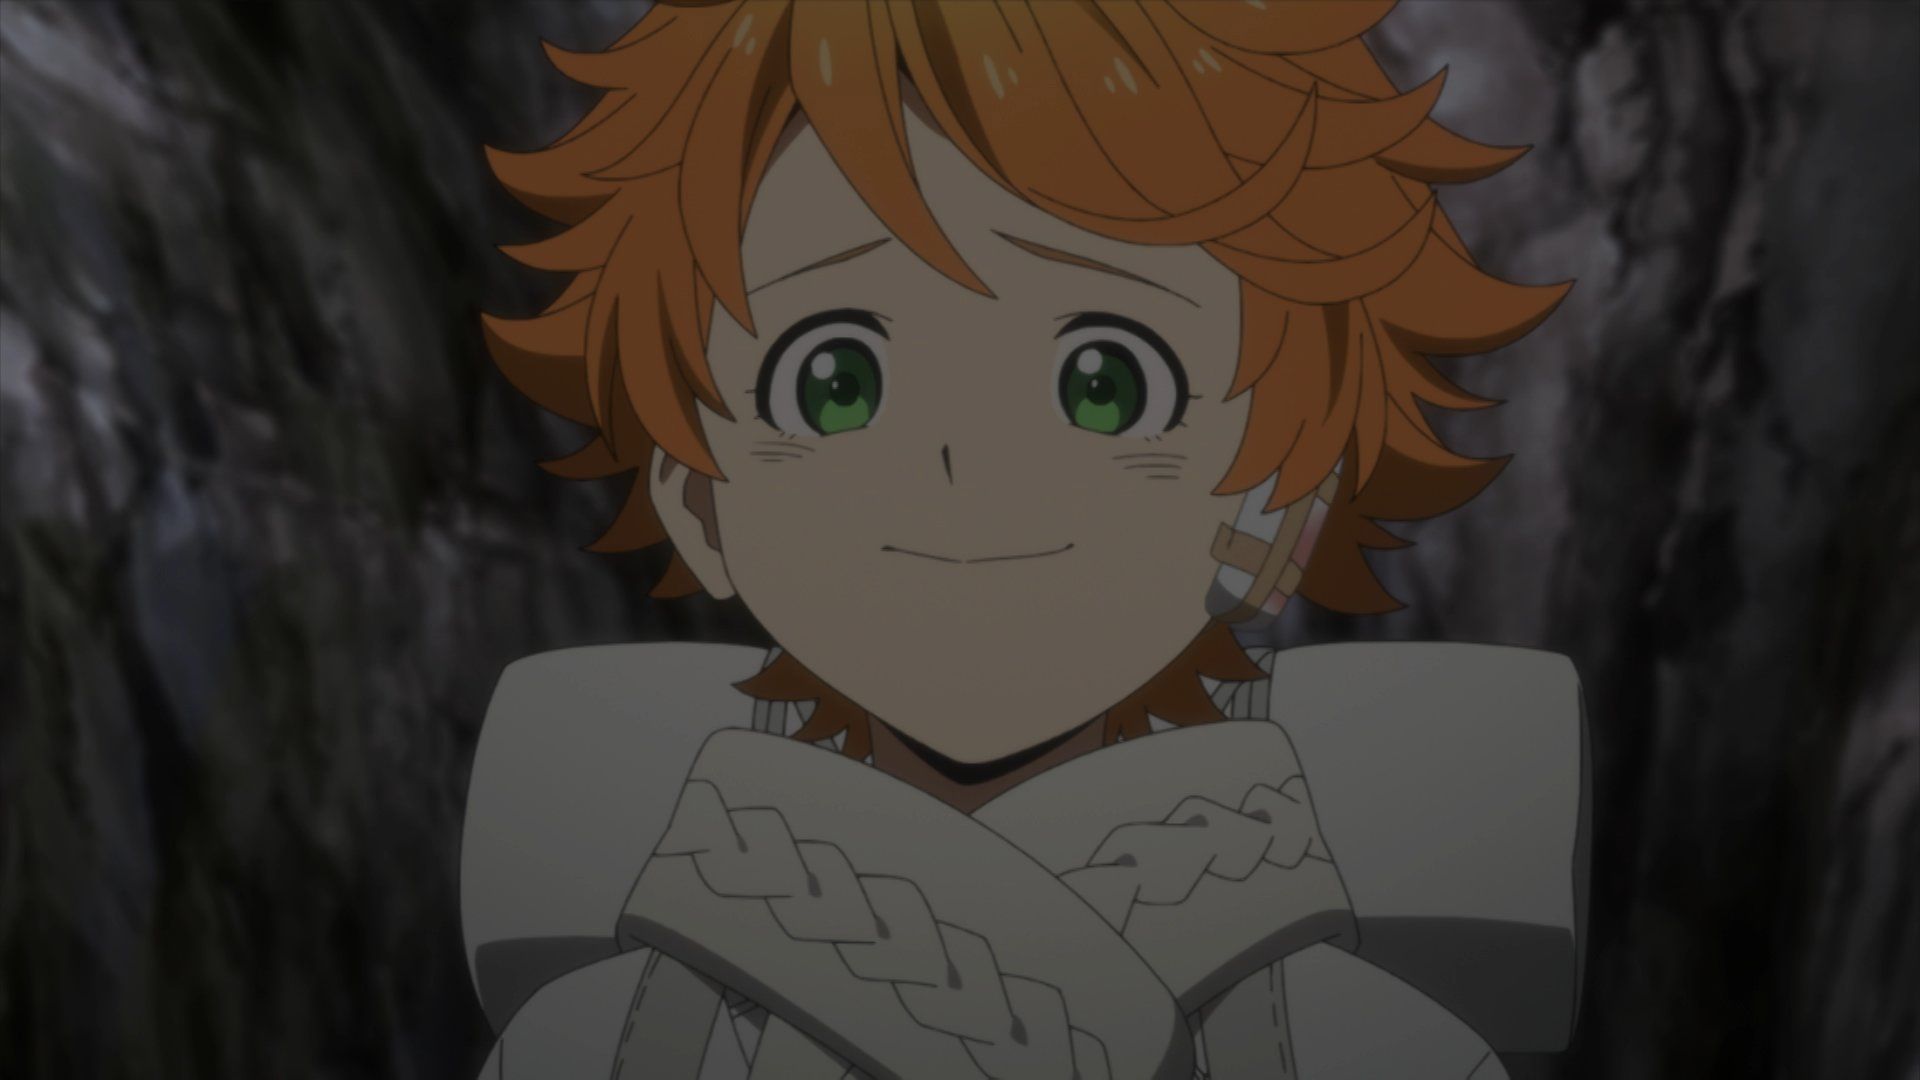 Aniplex of America Monday everyone! We have a BIG week of premieres ahead of us! Wednesday: The Promised Neverland Season 2 Thursday: Cells at Work!! Season 2 & Cells